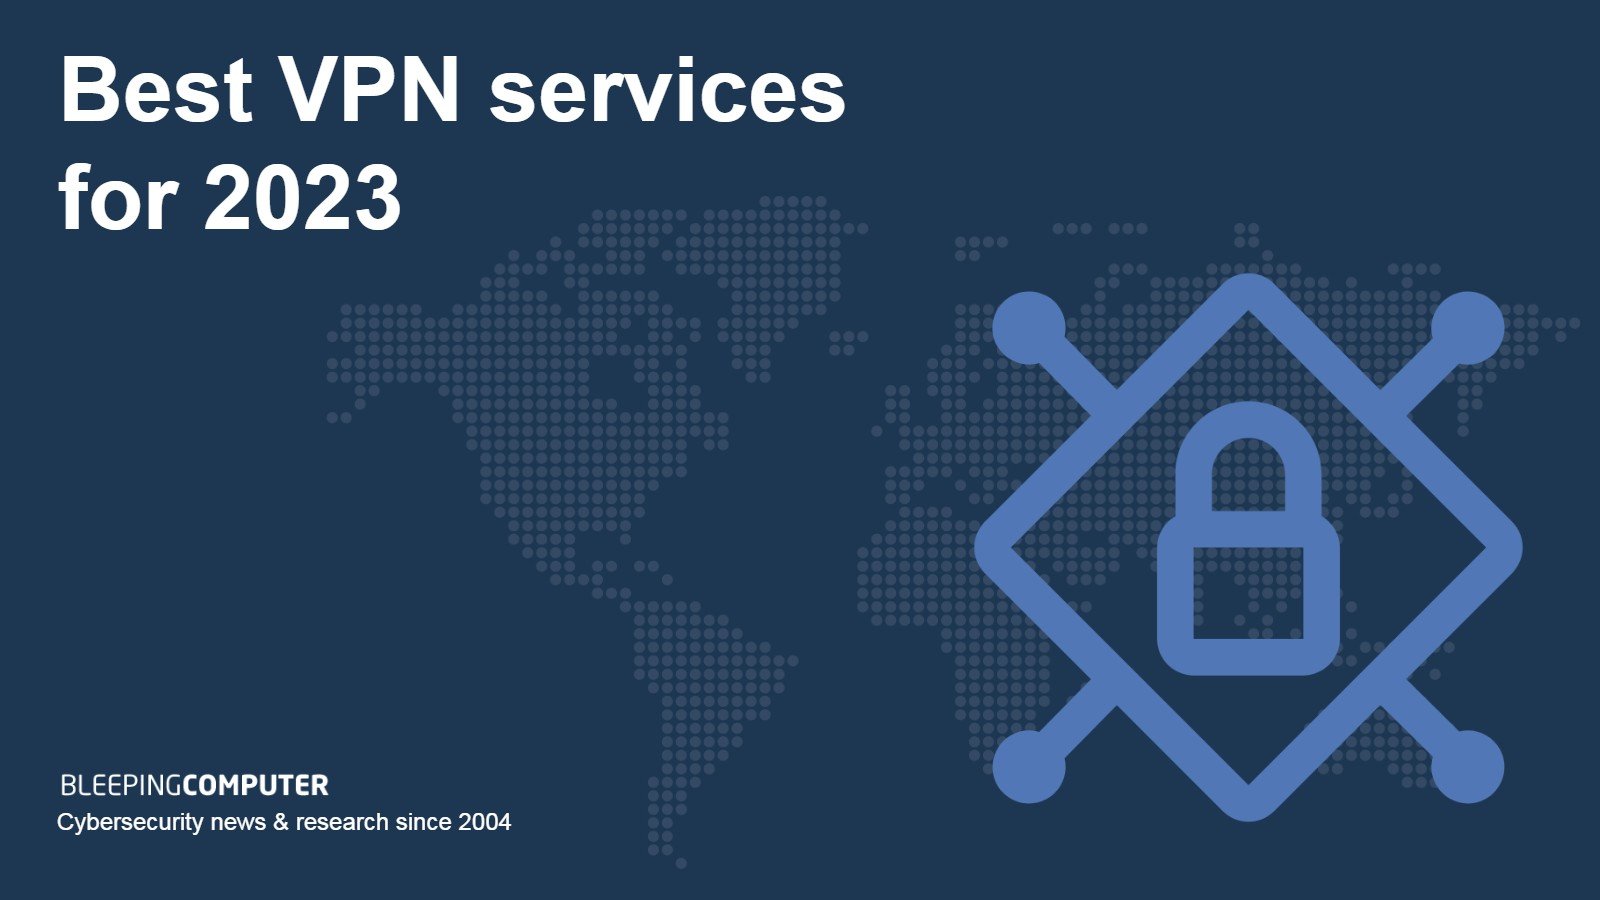 The Best VPN Services of 2023 Best VPN services for 2023